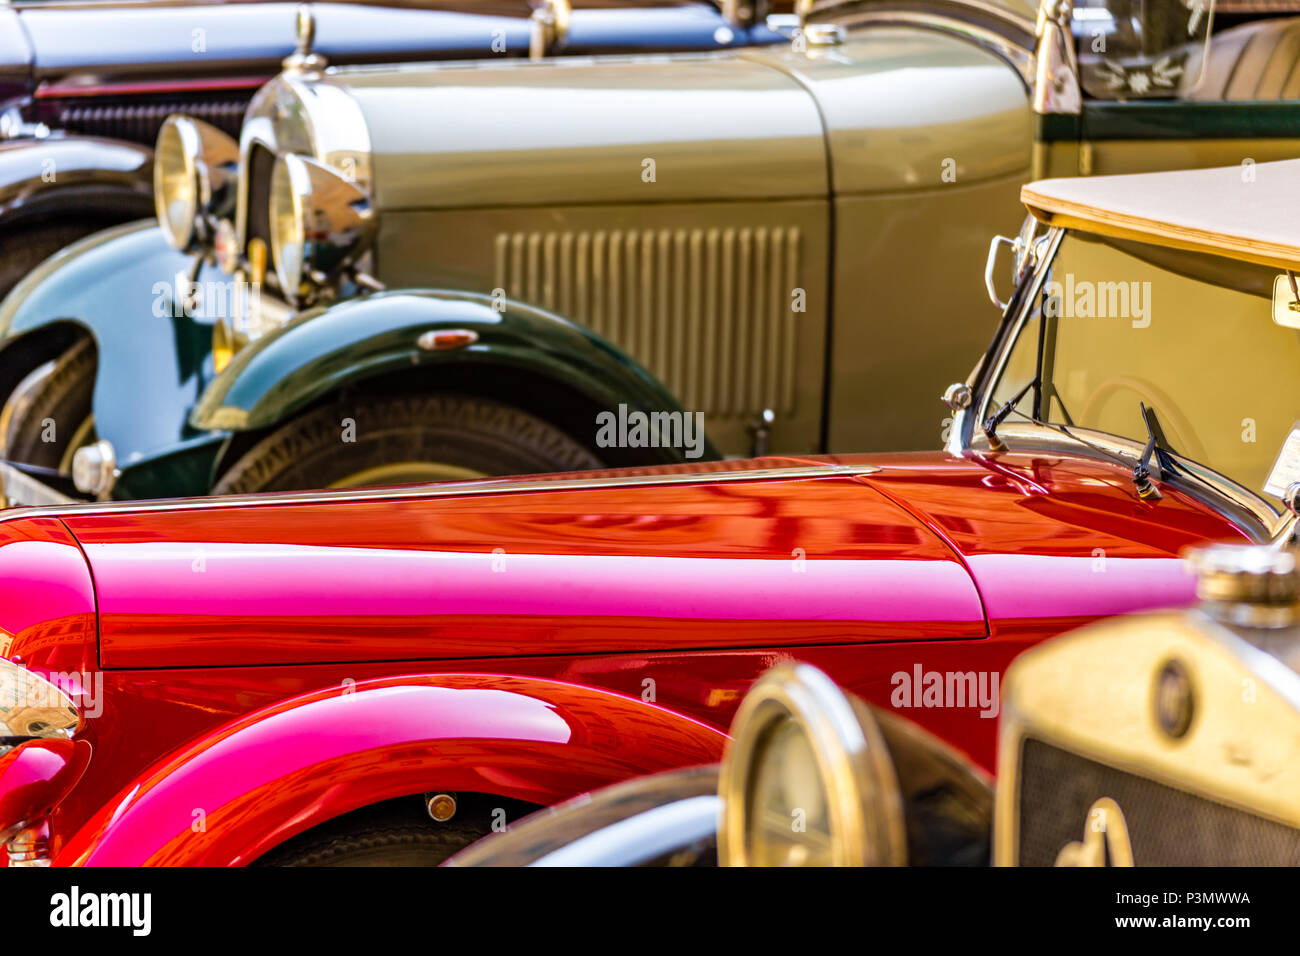 Design and colors of vintage car bodies Stock Photo